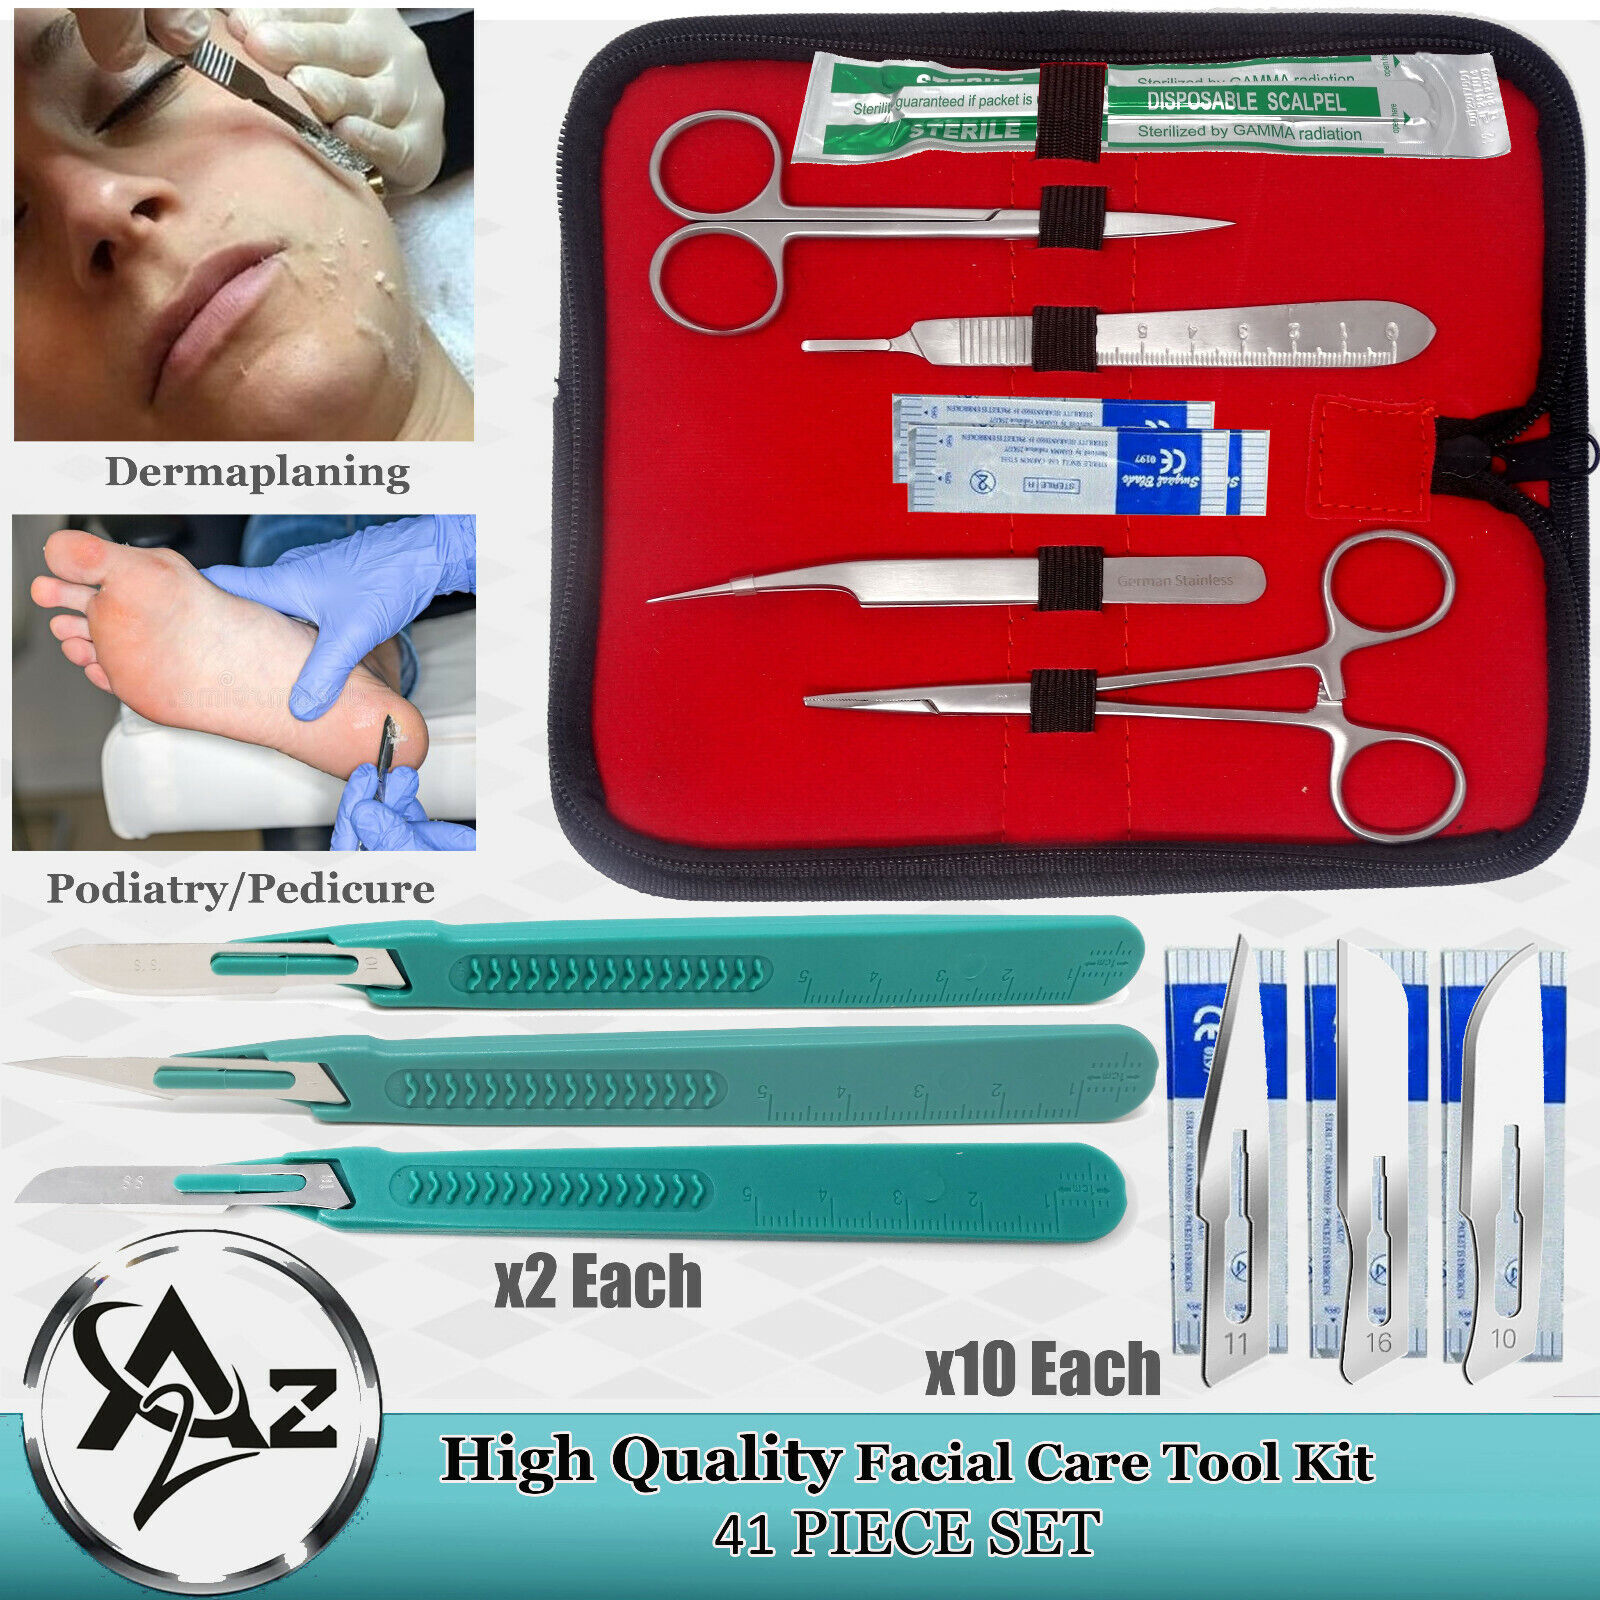 Latest Dermaplaning Dead Skin Removing Kit- Disposable Scalpel+Blades #16,10,11  A2Z SCILAB Does Not Apply